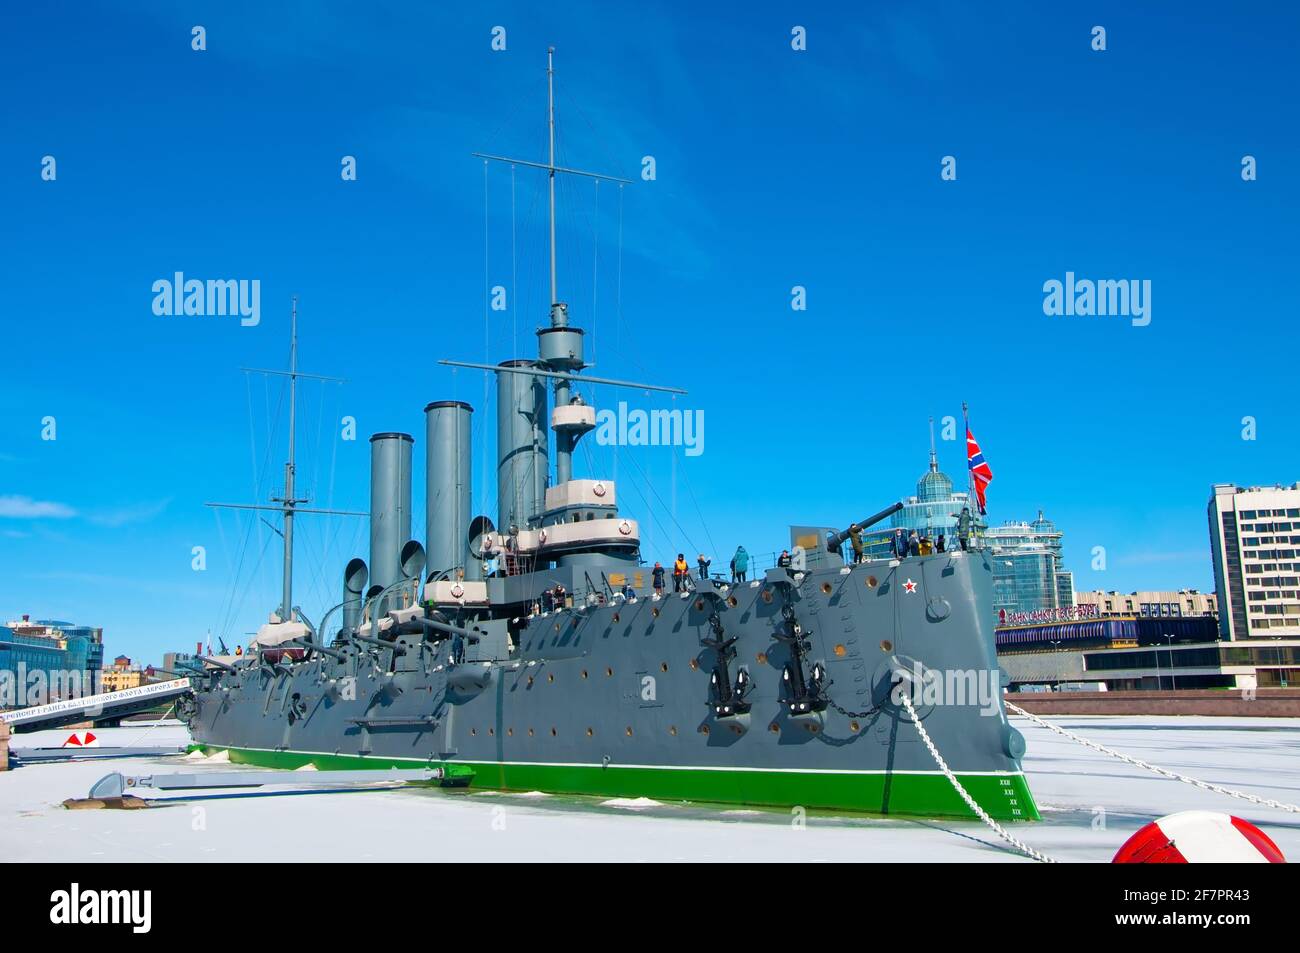 ST. PETERSBURG, RUSSIA - March 27 , 2021: Aurora cruiser, the symbol of the October revolution, currently preserved as a museum ship on the Neva river Stock Photo